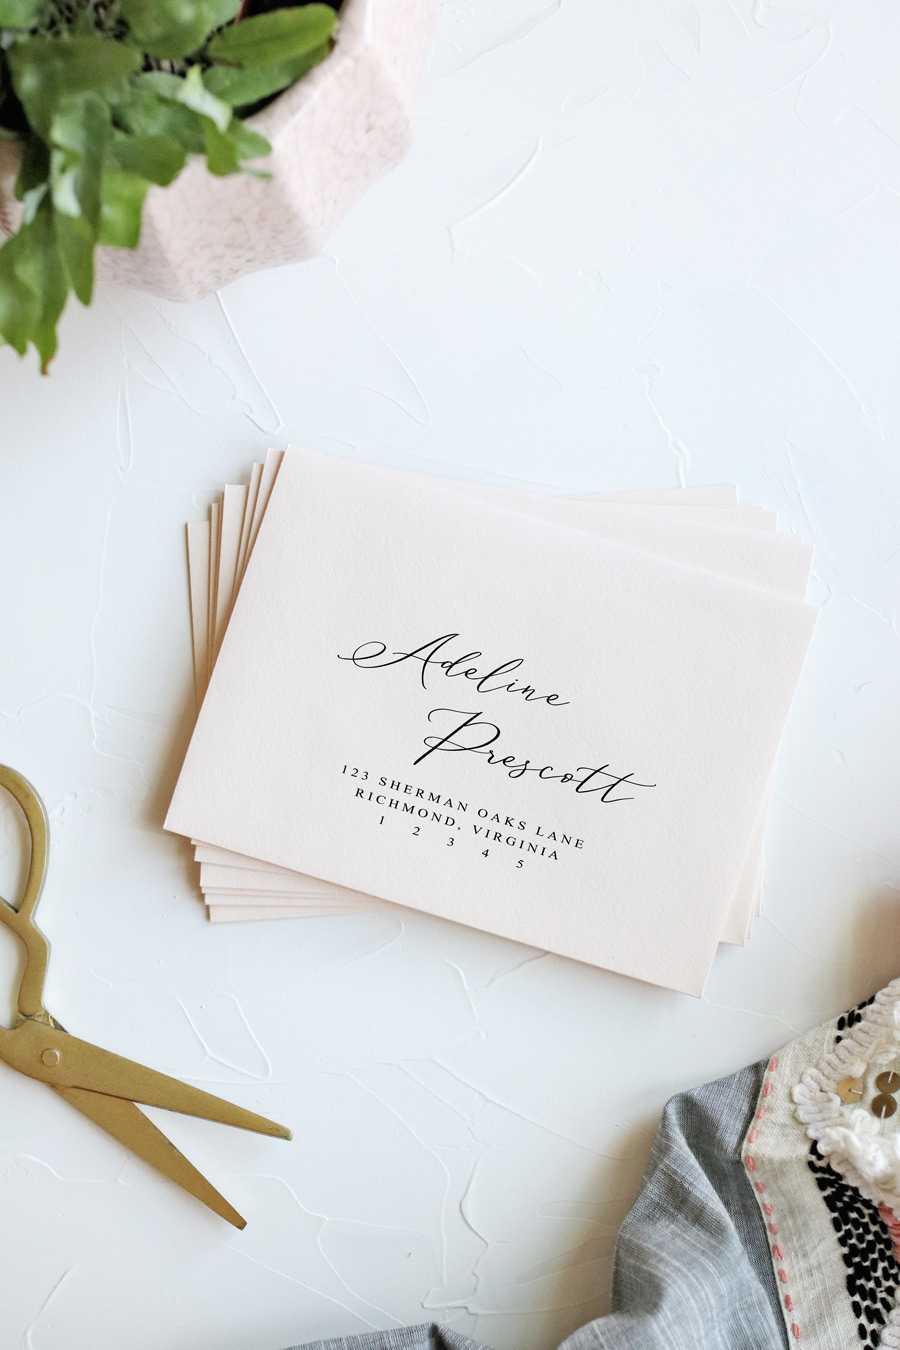 How To Print Envelopes The Easy Way | Pipkin Paper Company Regarding Paper Source Templates Place Cards